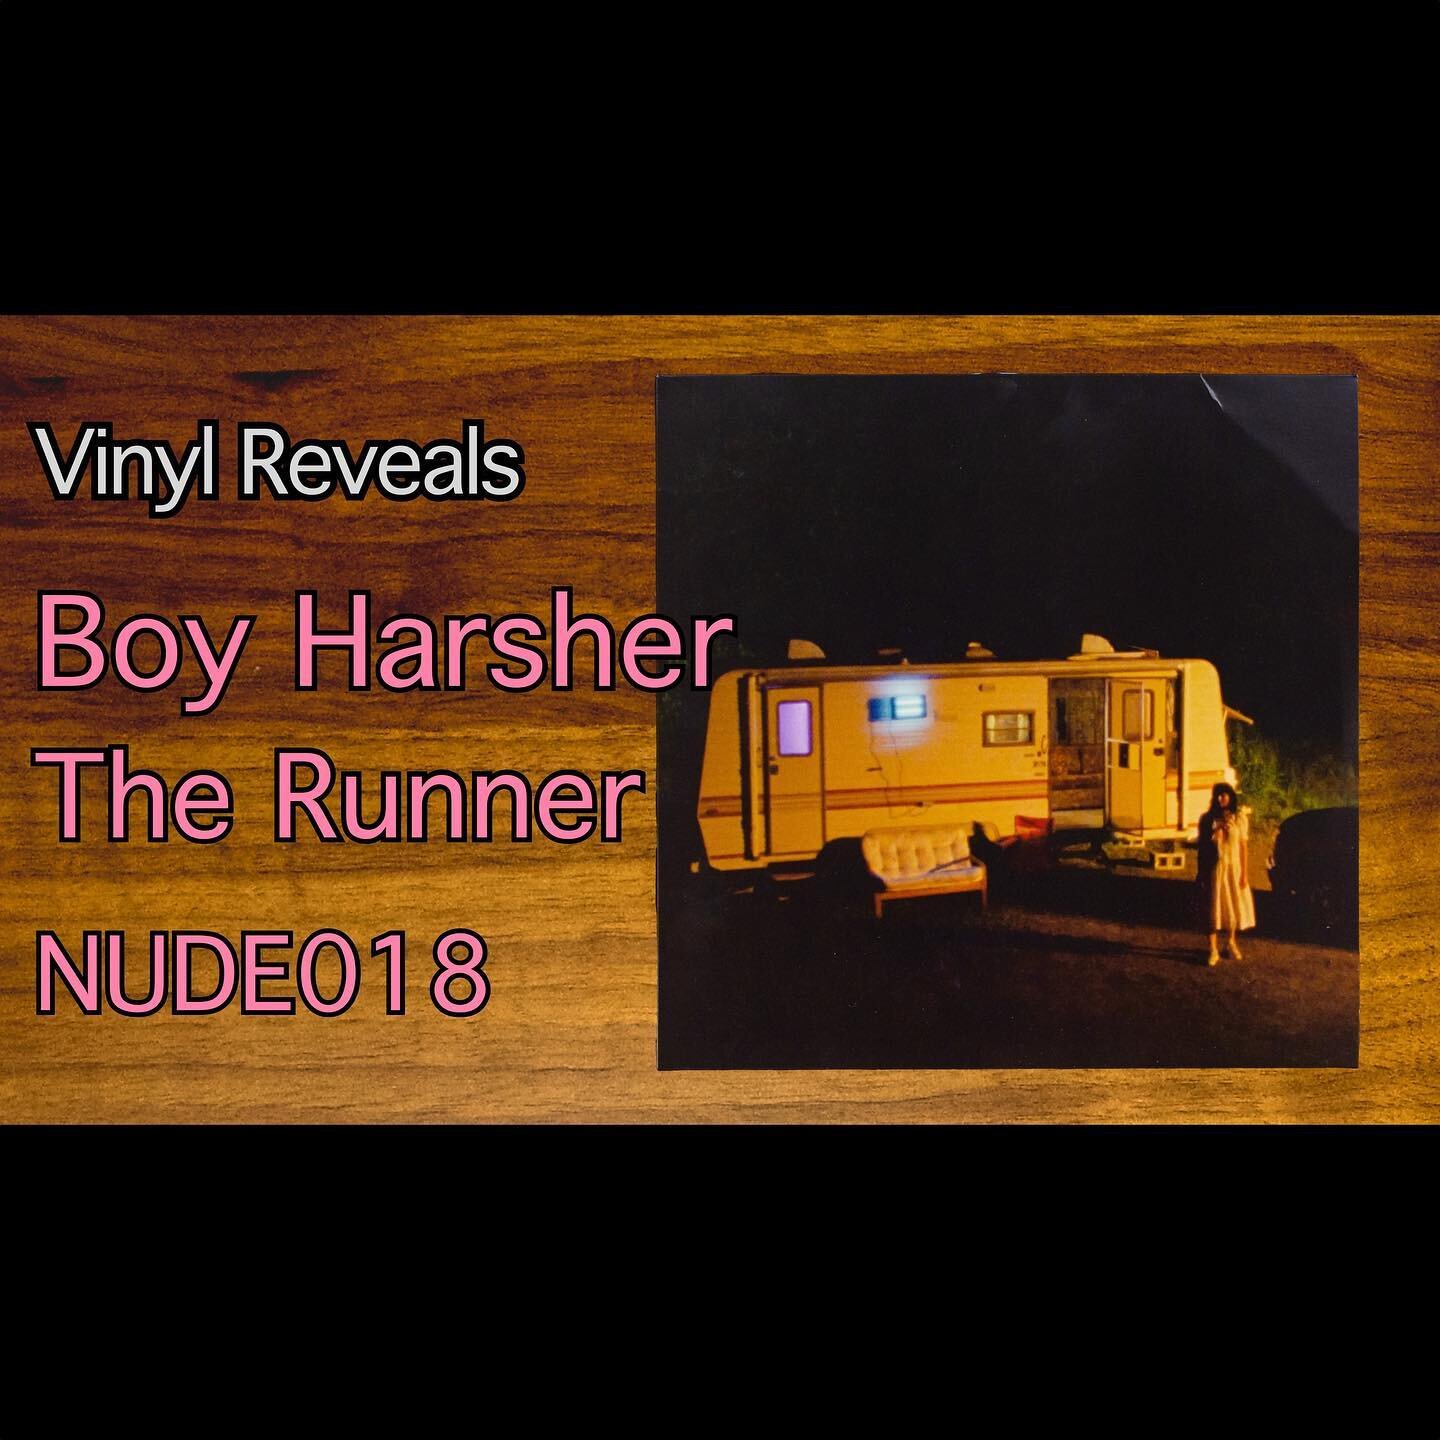 Today we are looking at The Runner (Original Soundtrack) by Boy Harsher. Video is now live on the Vinyl Reveals YouTube channel. Link in profile.

#vinylReveal #vinyl #vinylcollection #vinylrecords #records #vinylReveals #vinylcommunity @boyharsher @